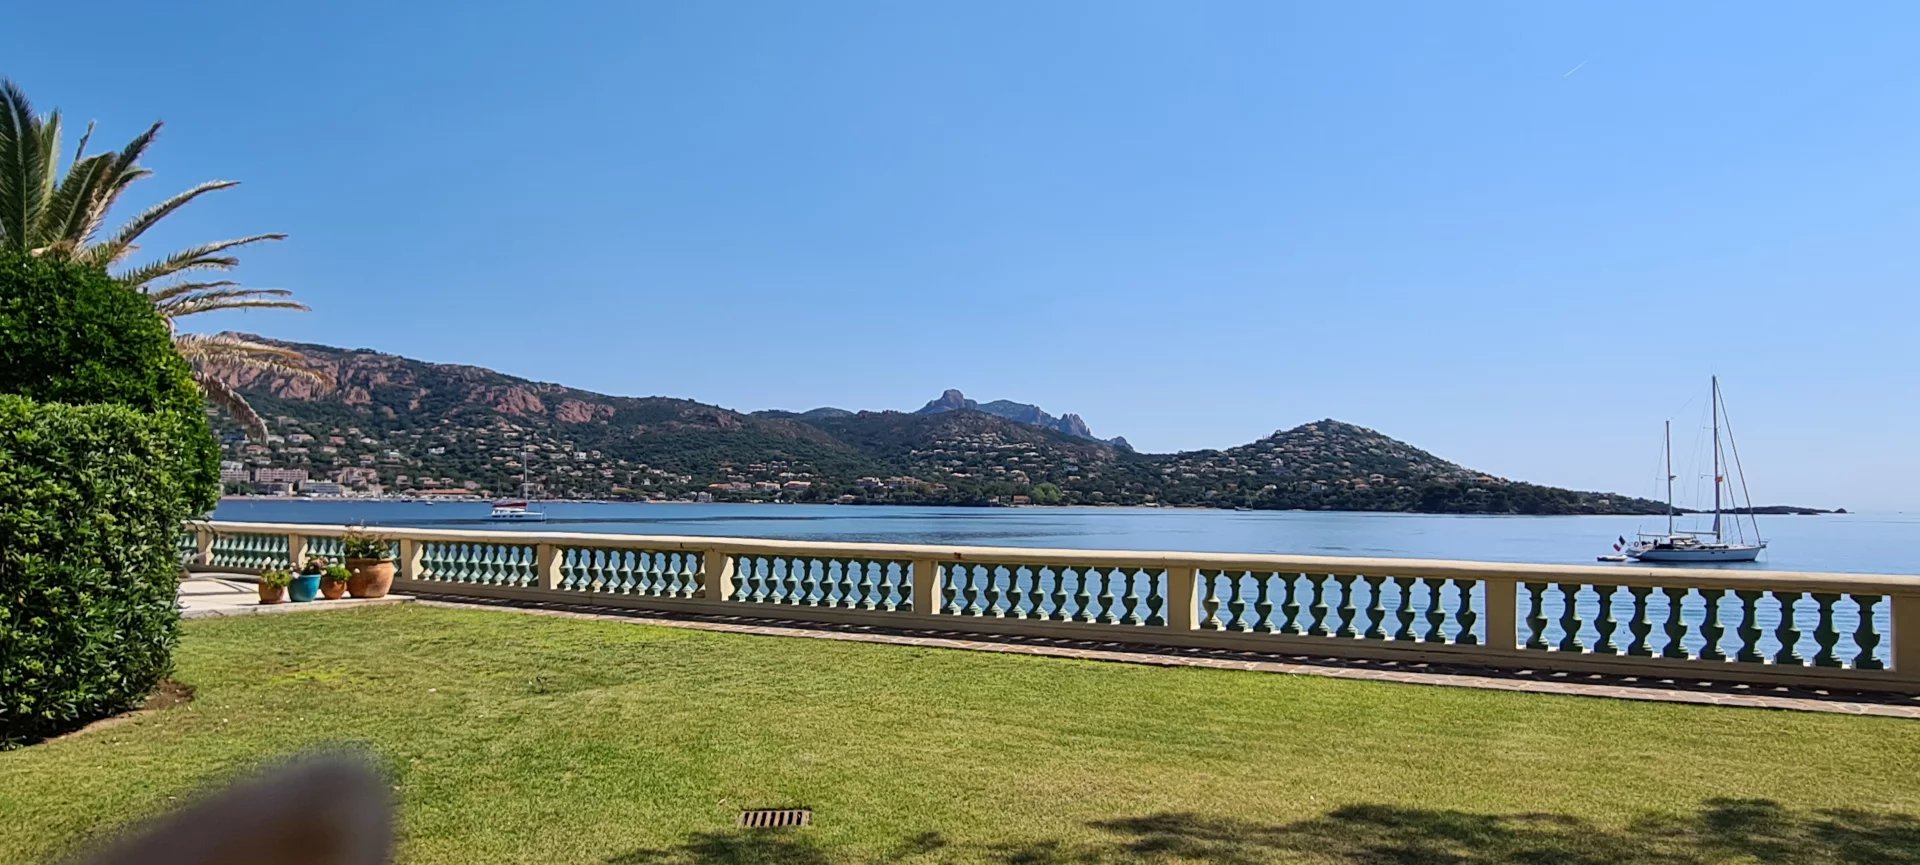 WATERFRONT PROPERTY BETWEEN CANNES AND SAINT RAPHAEL